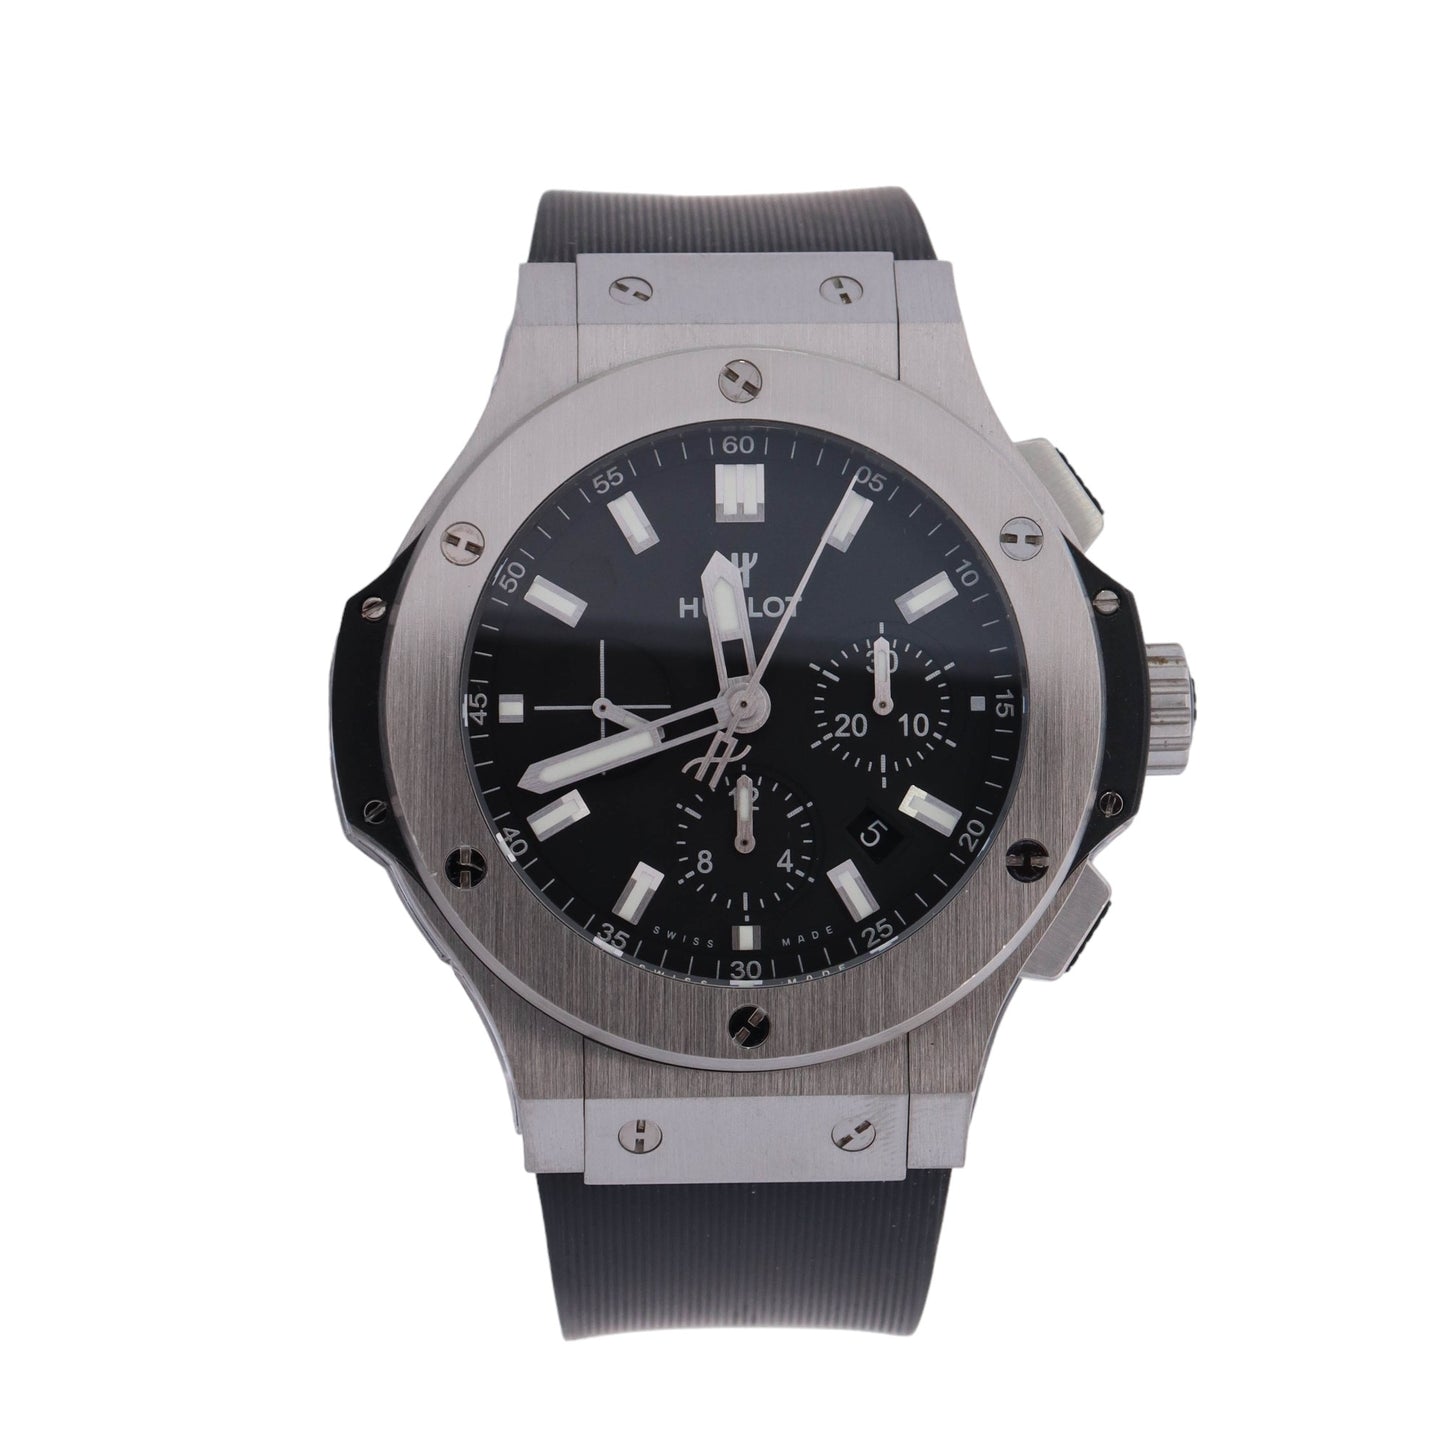 Hublot Big Bang Stainless Steel 44mm Black Chrono Dial Watch Reference #: 301.SX.1170.RX